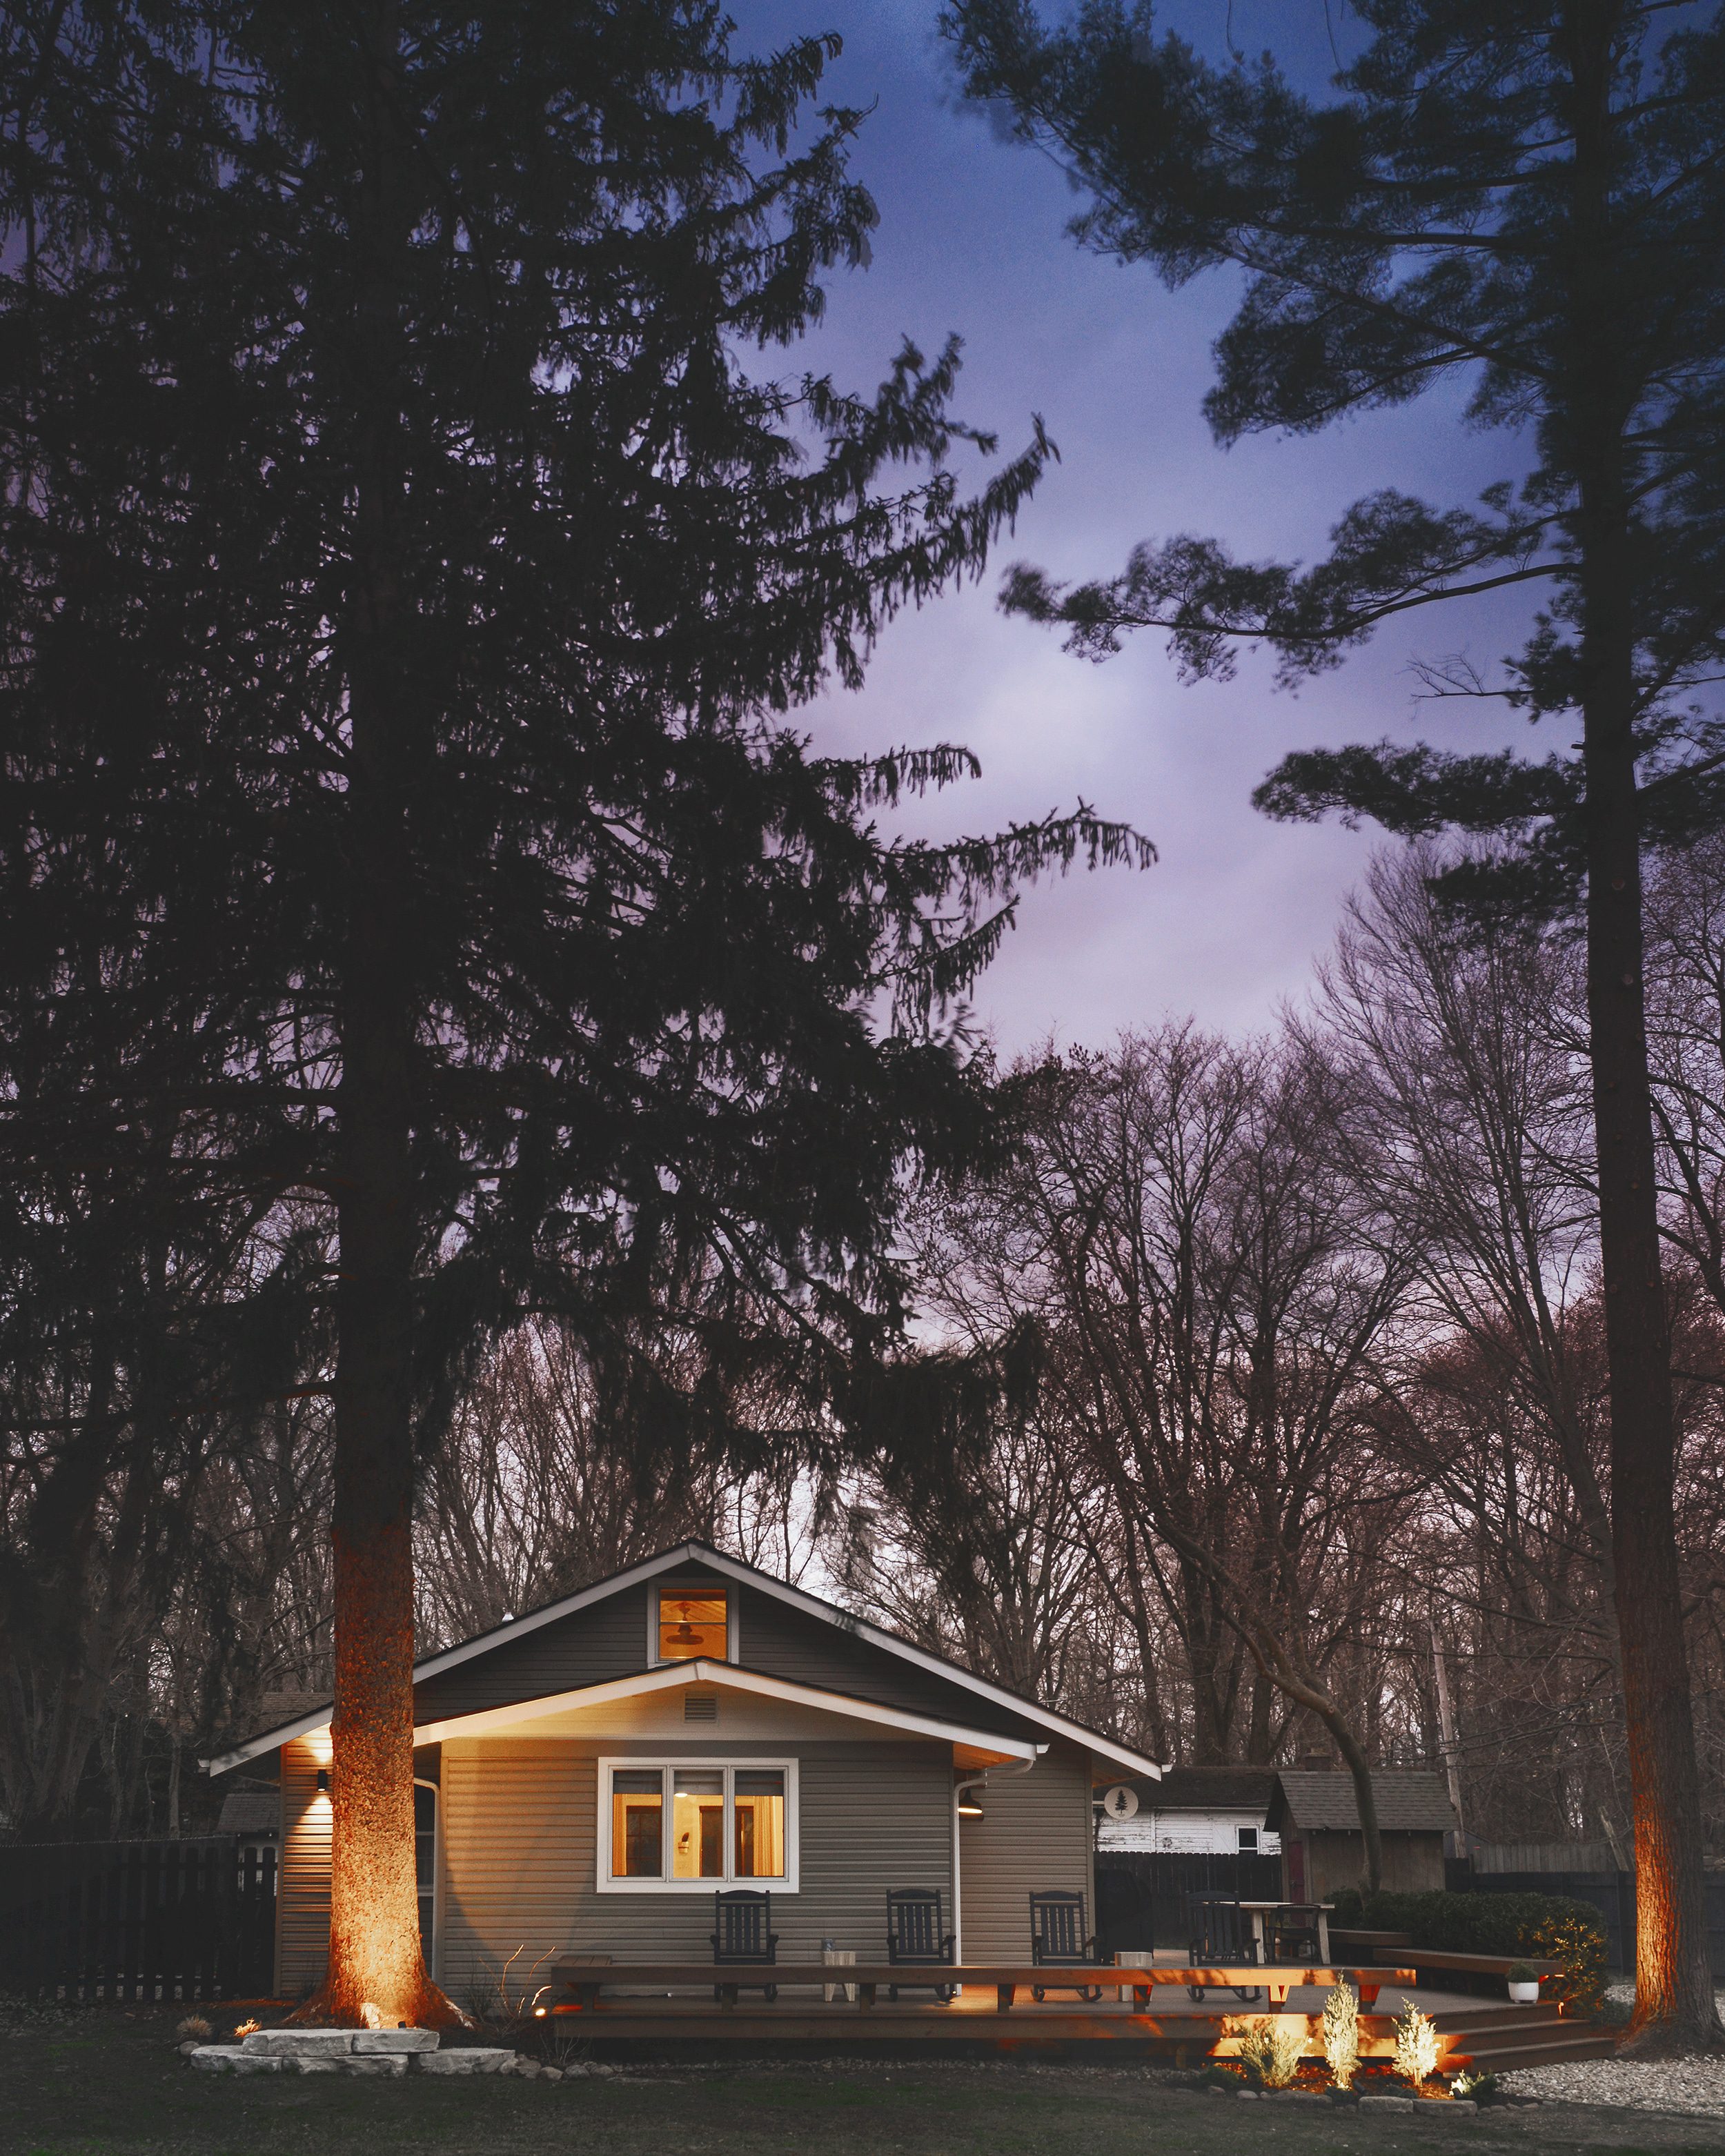 A straight on view of Tree House at night, with blue and purple skies and landscape lighting, via Yellow Brick Home